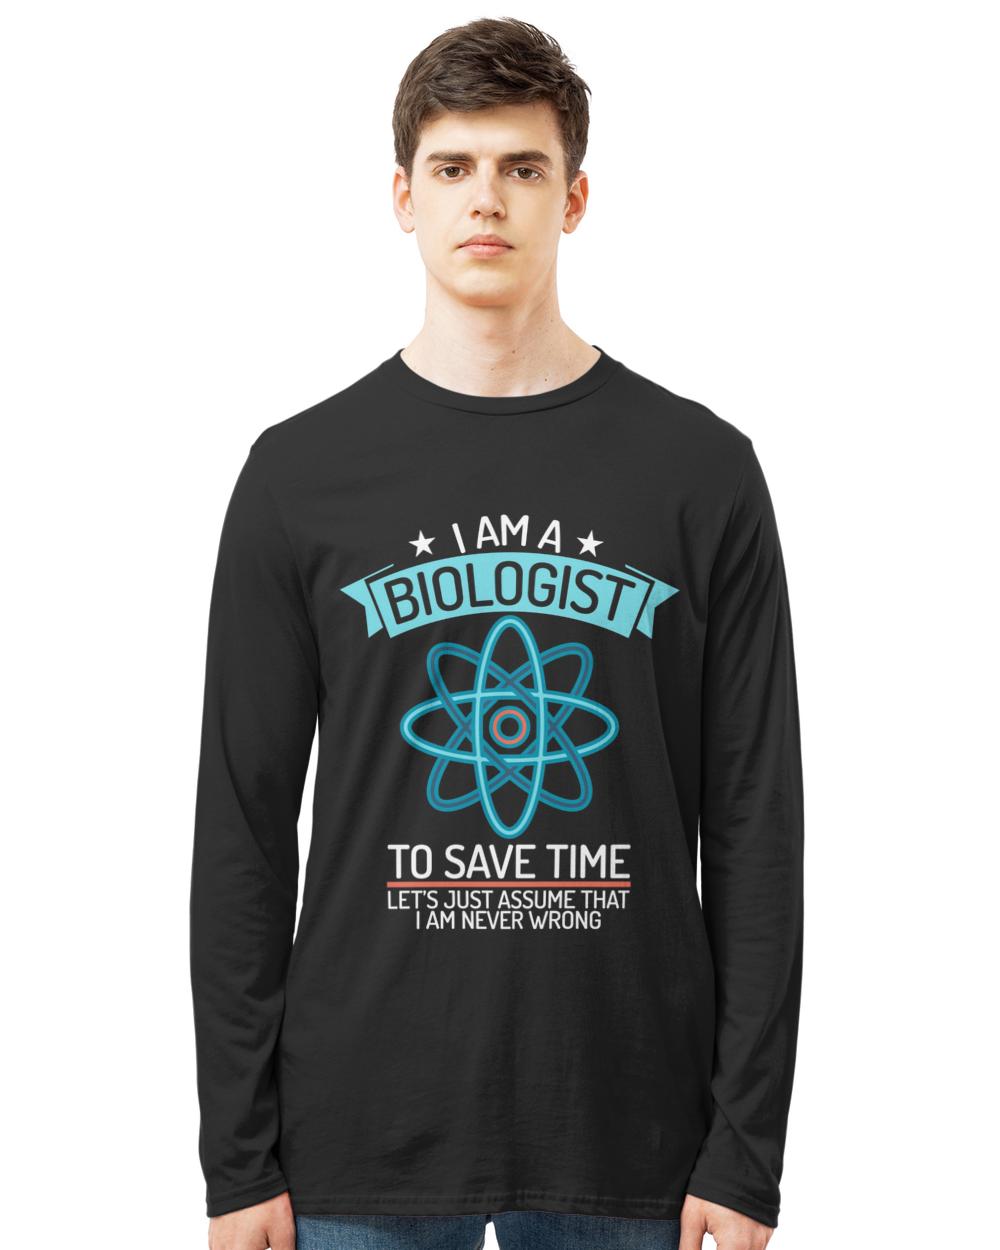 New im a biologist funny science saying science lover t-shirt